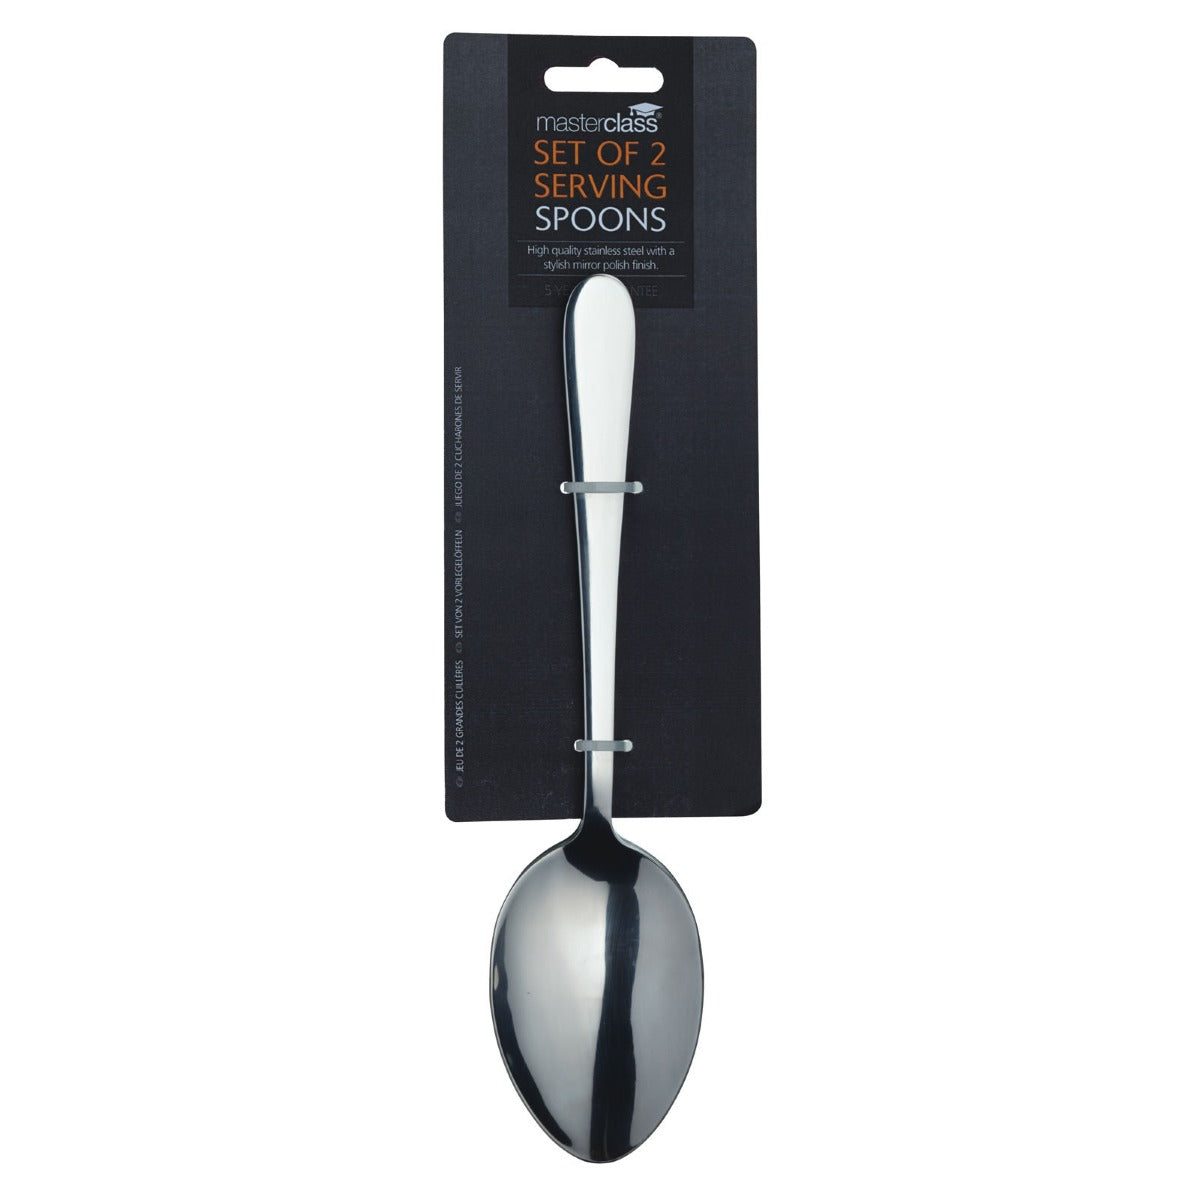 MasterClass Serving Spoons Set of 2